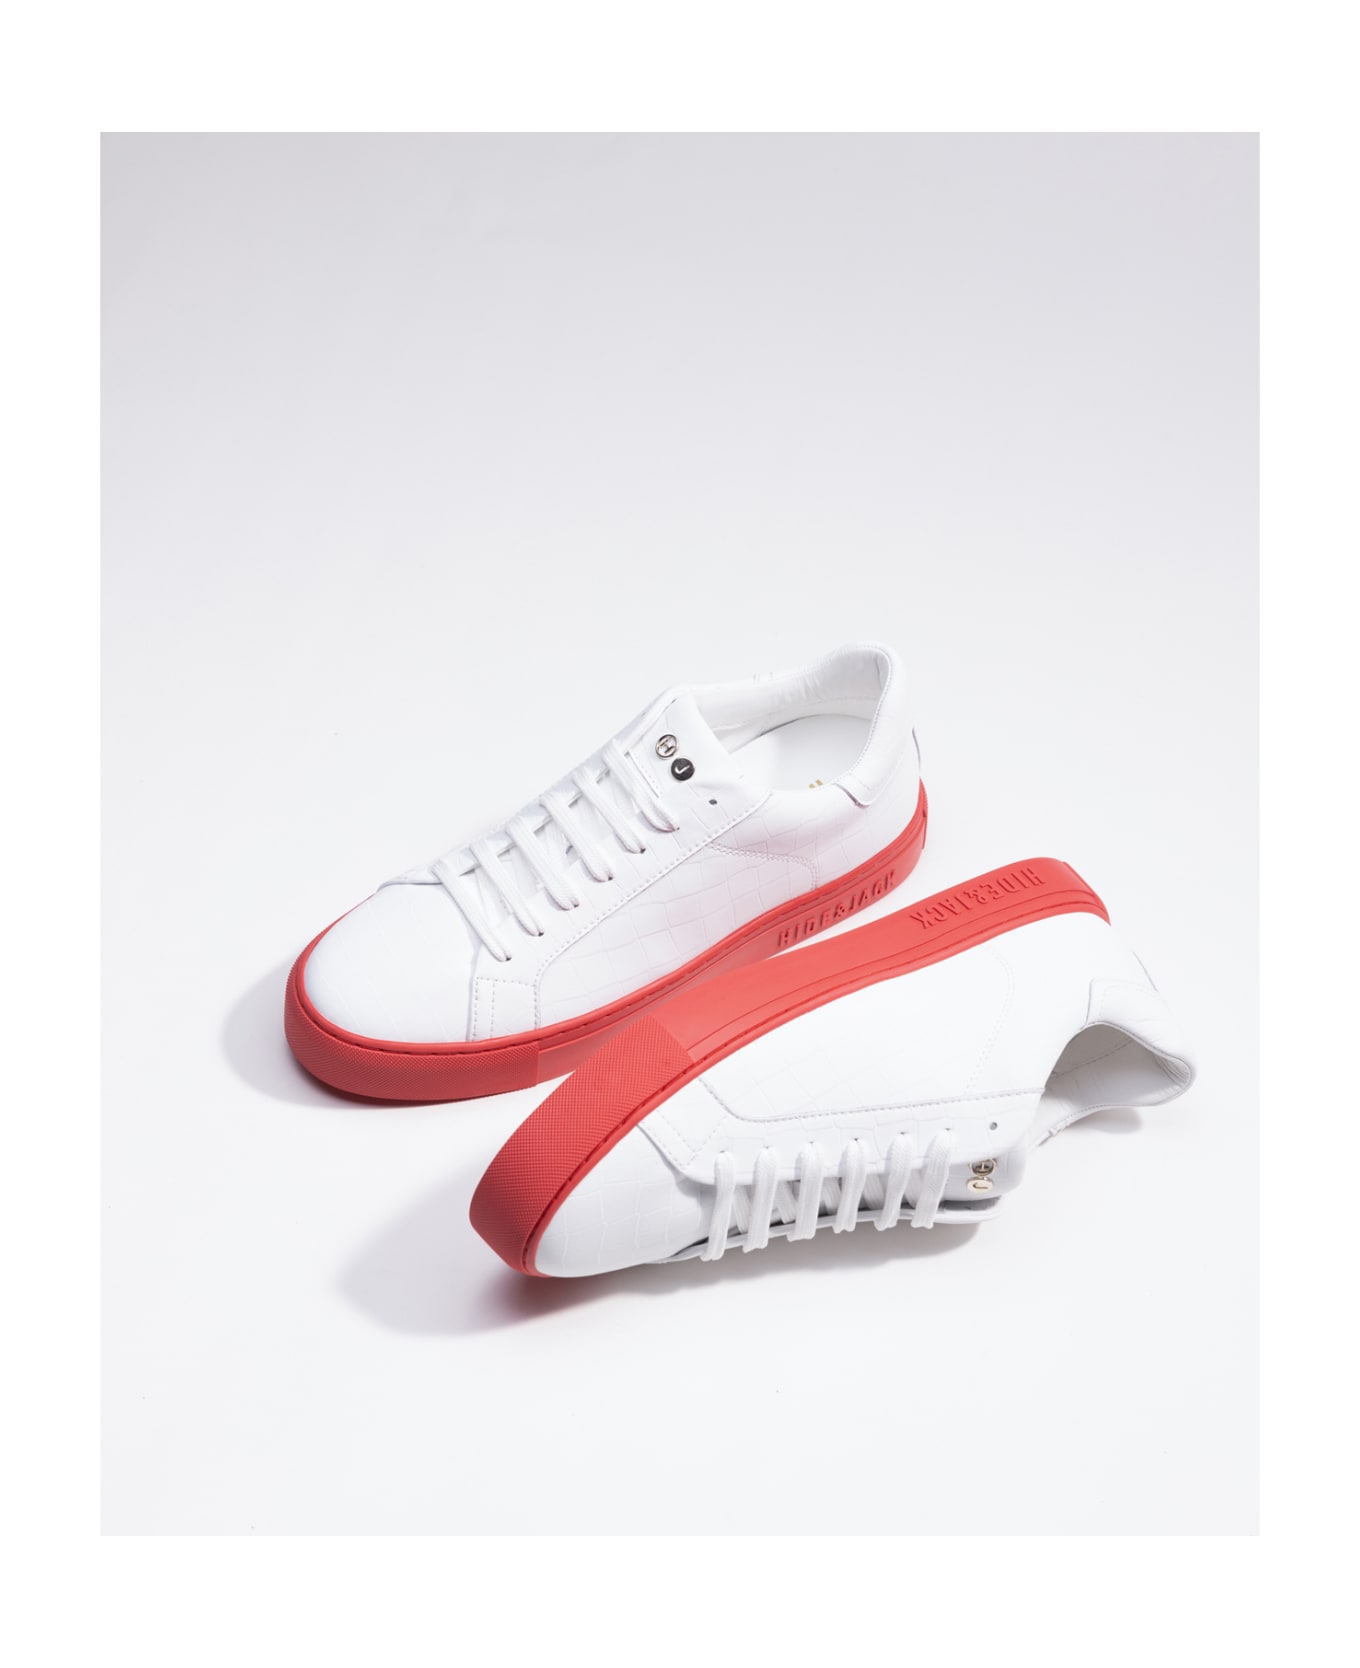 Hide&Jack Low Top Sneaker - Essence Tuscany White Red